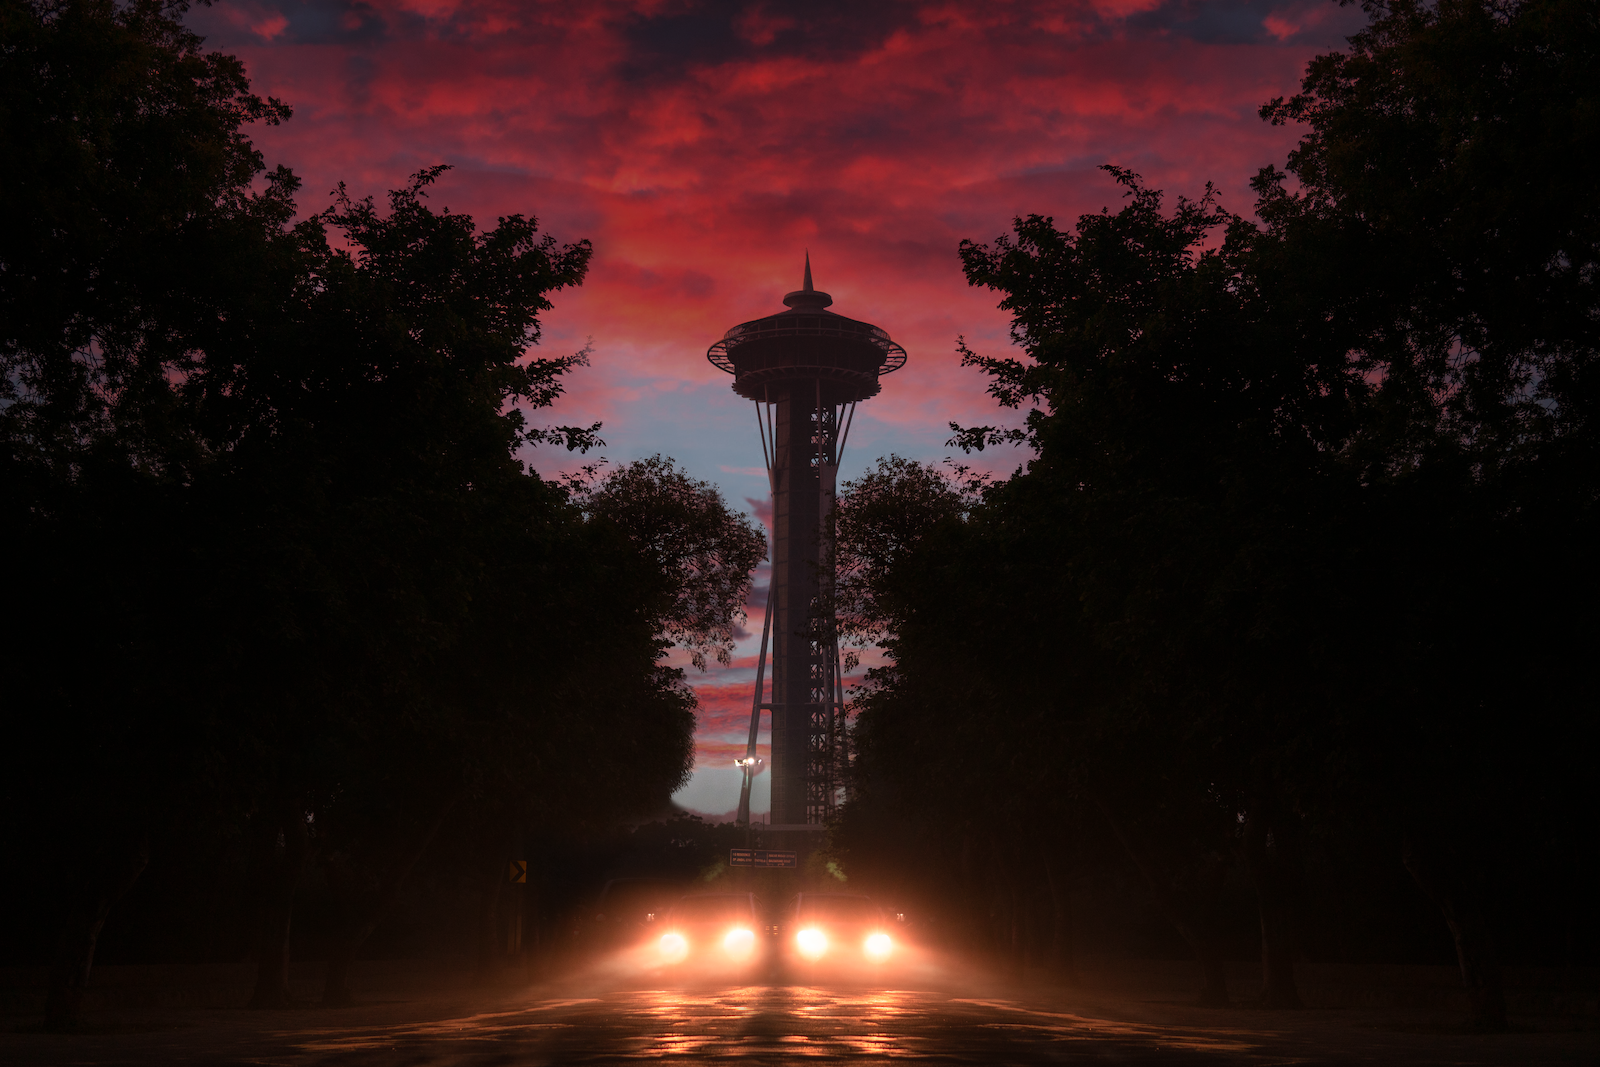 Seattle Space Needle - Black Tower With Lights During Night Time